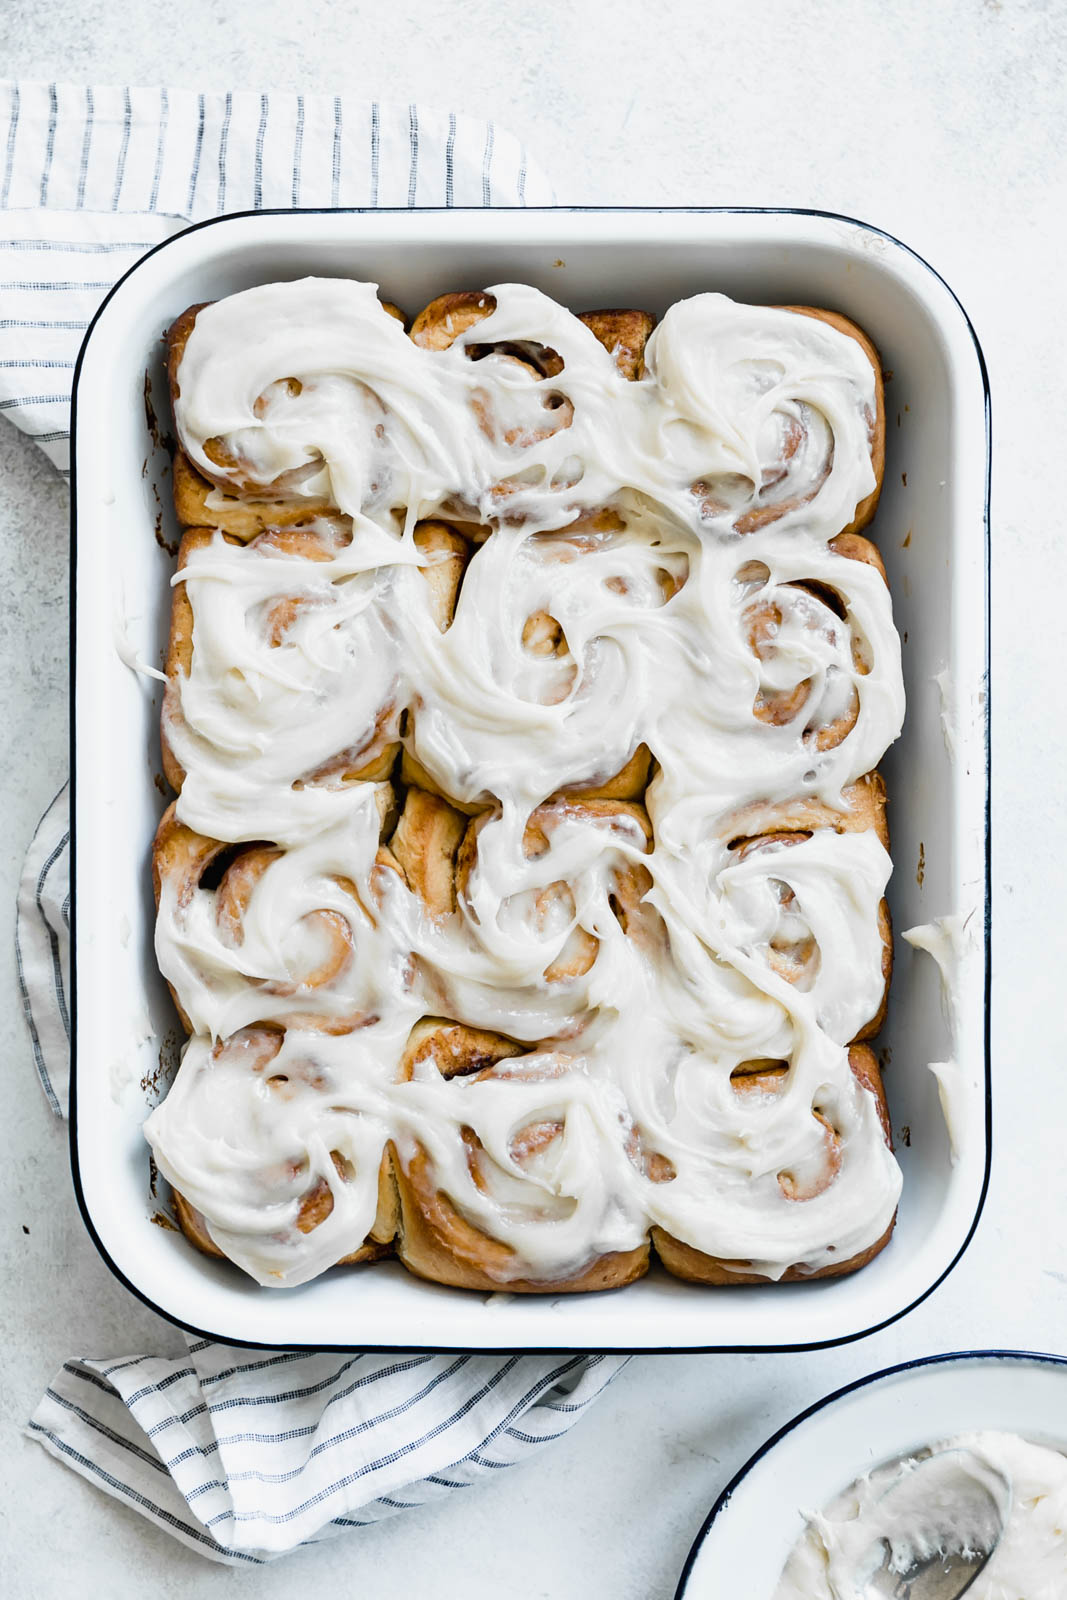  maple cinnamon sticky buns in a baking pan